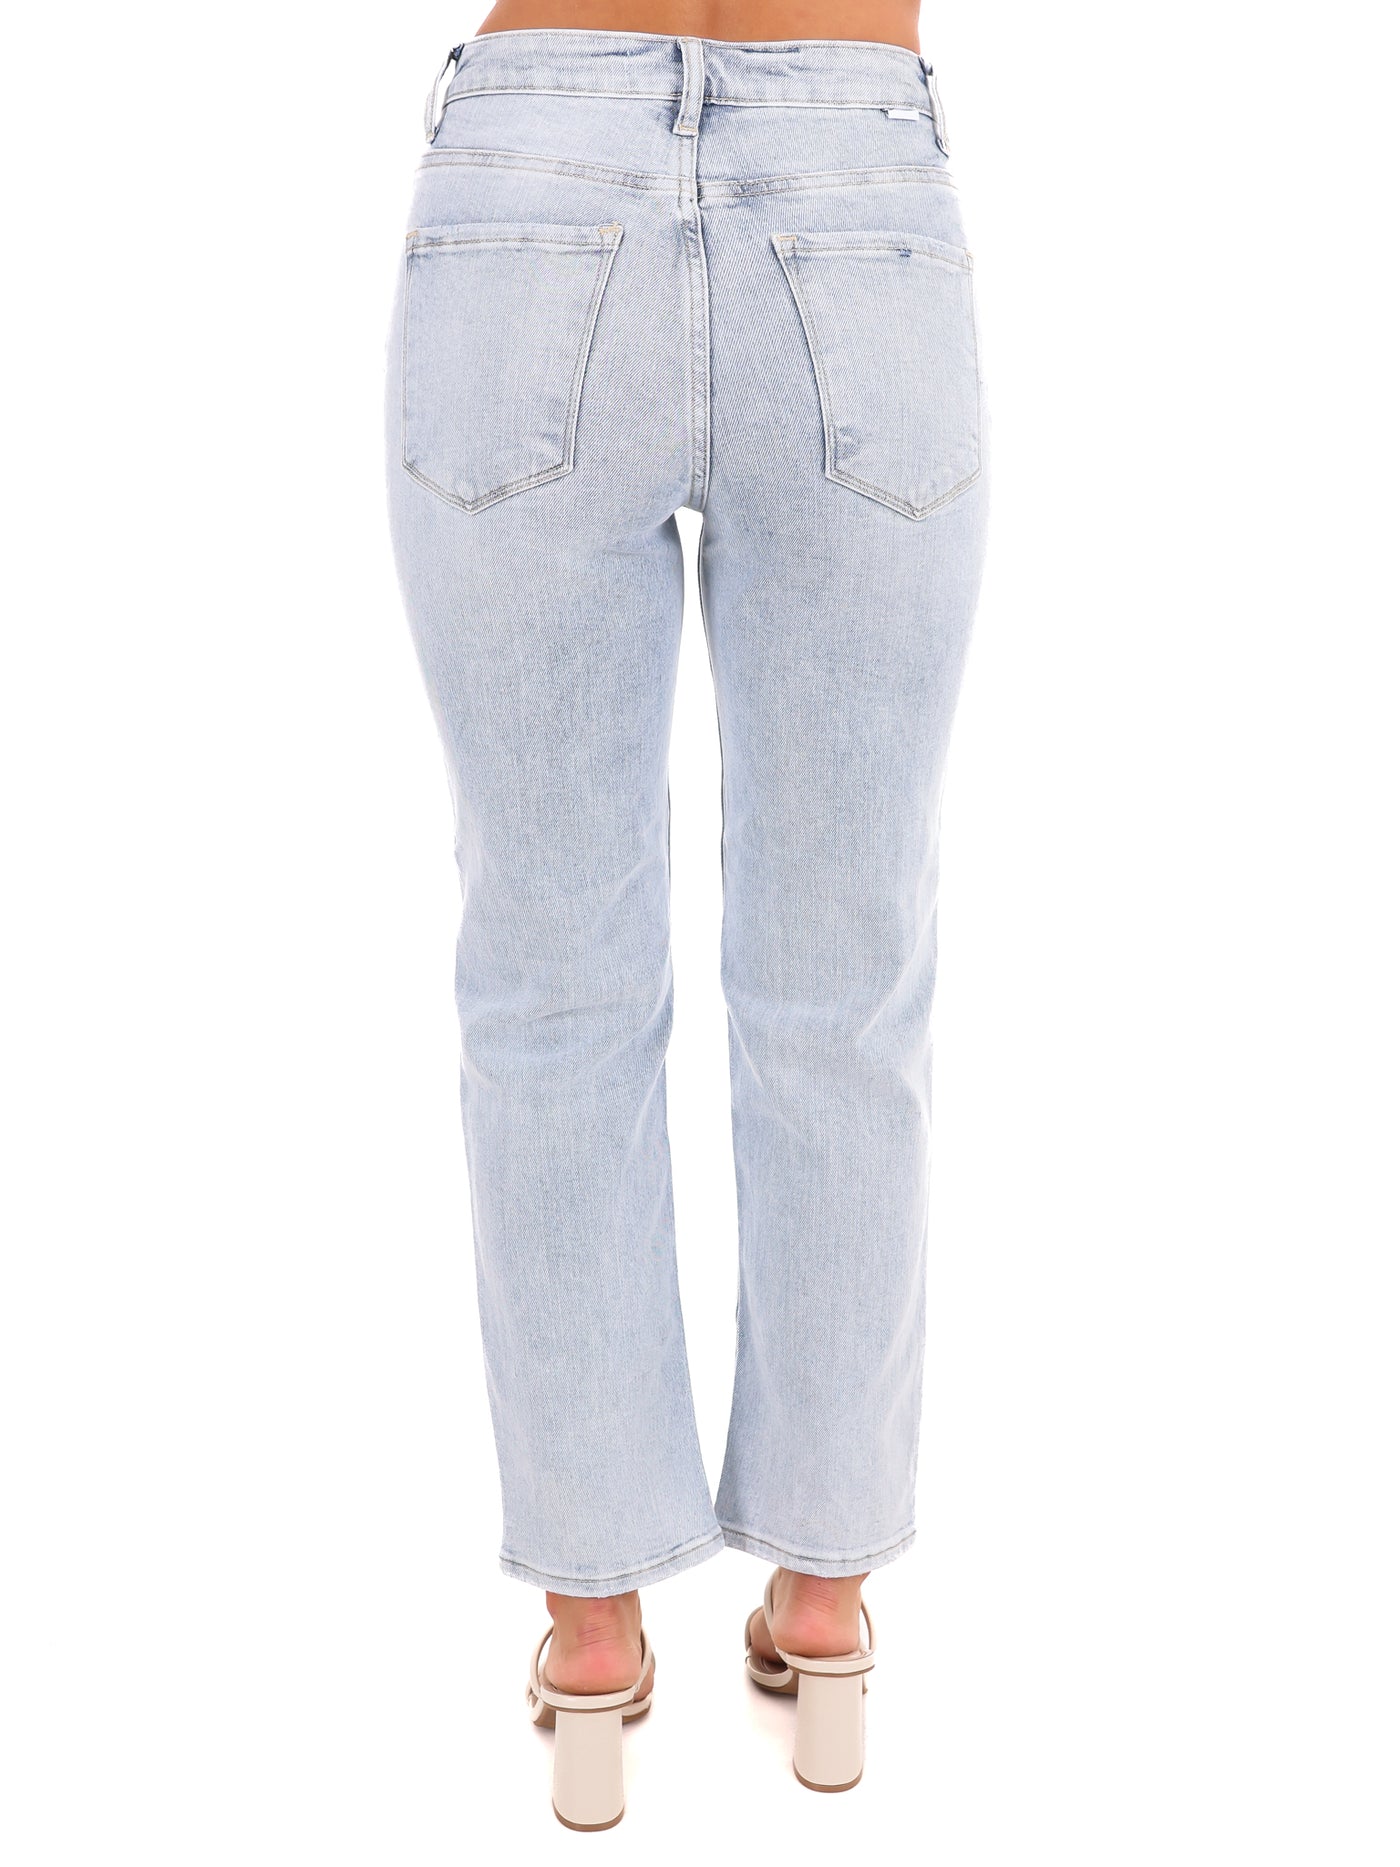 Times Change High Rise Crop Jeans